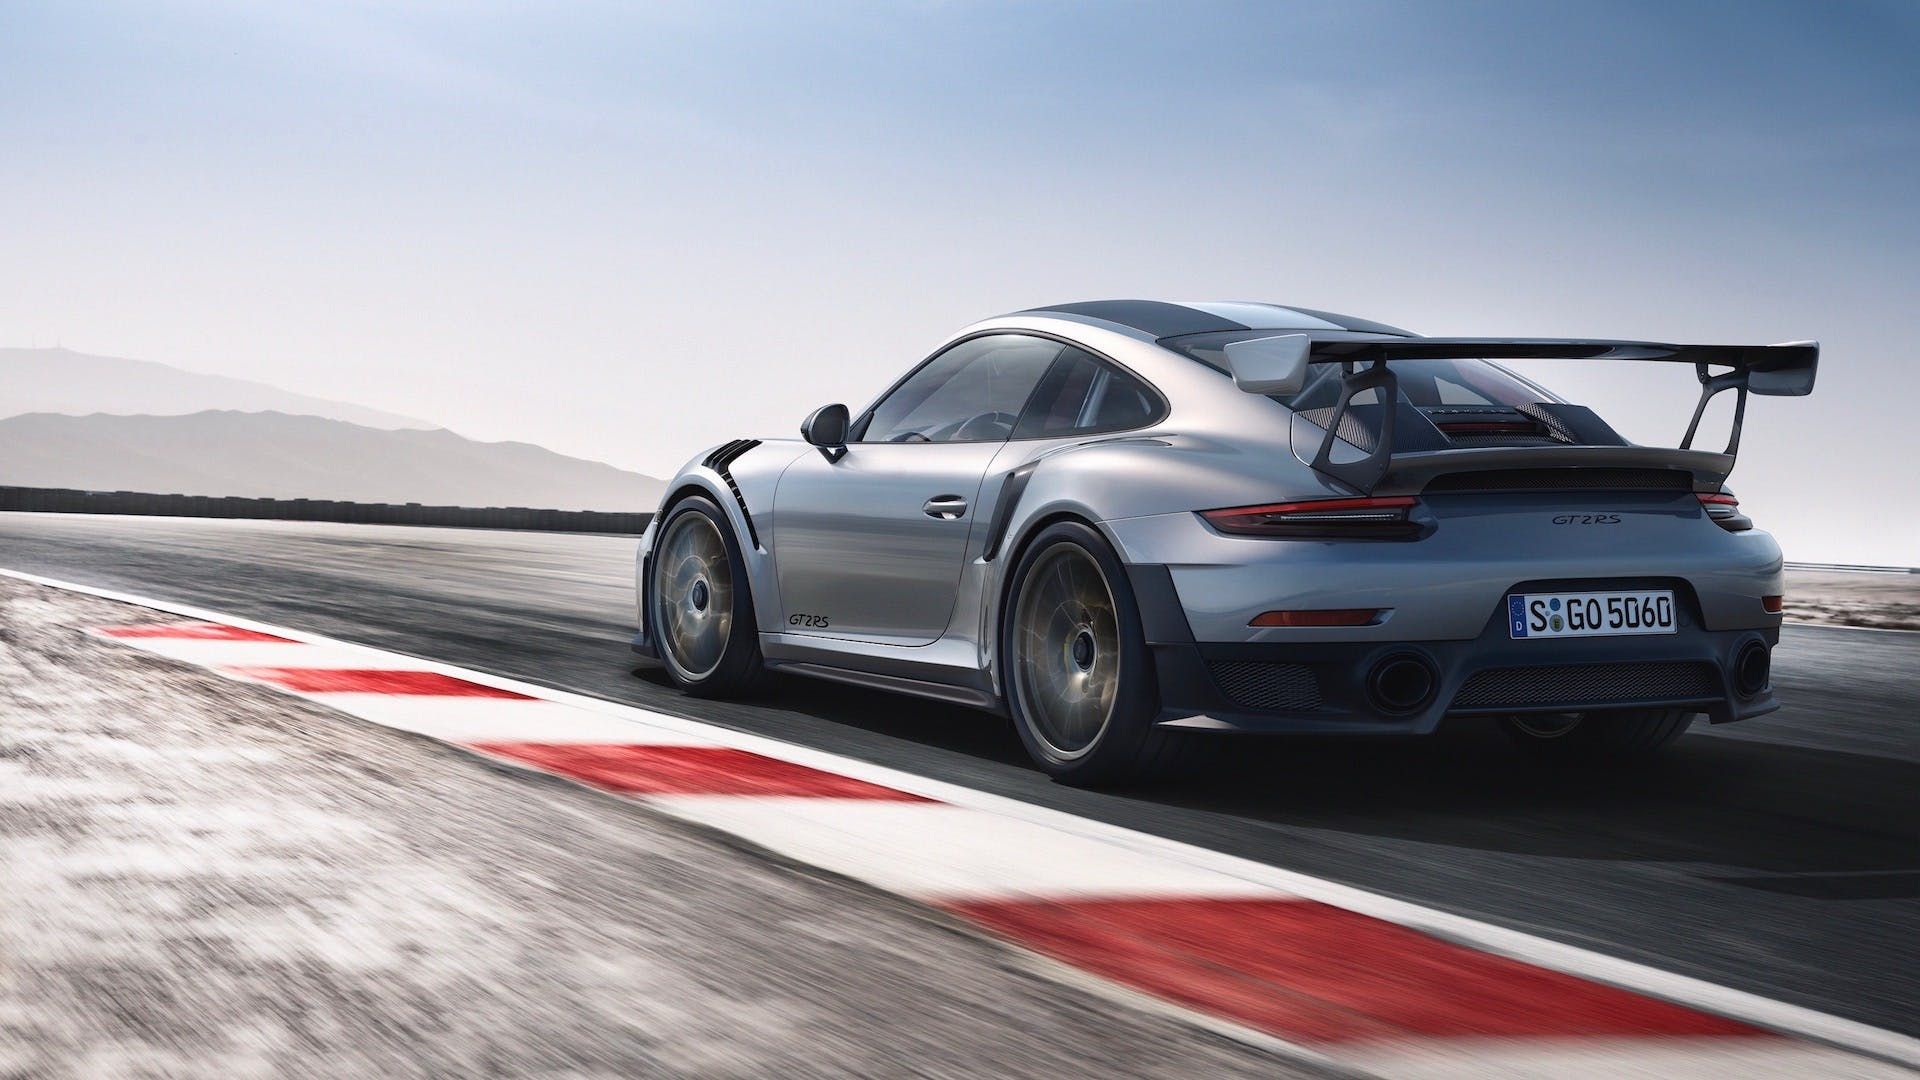 The 911 RS